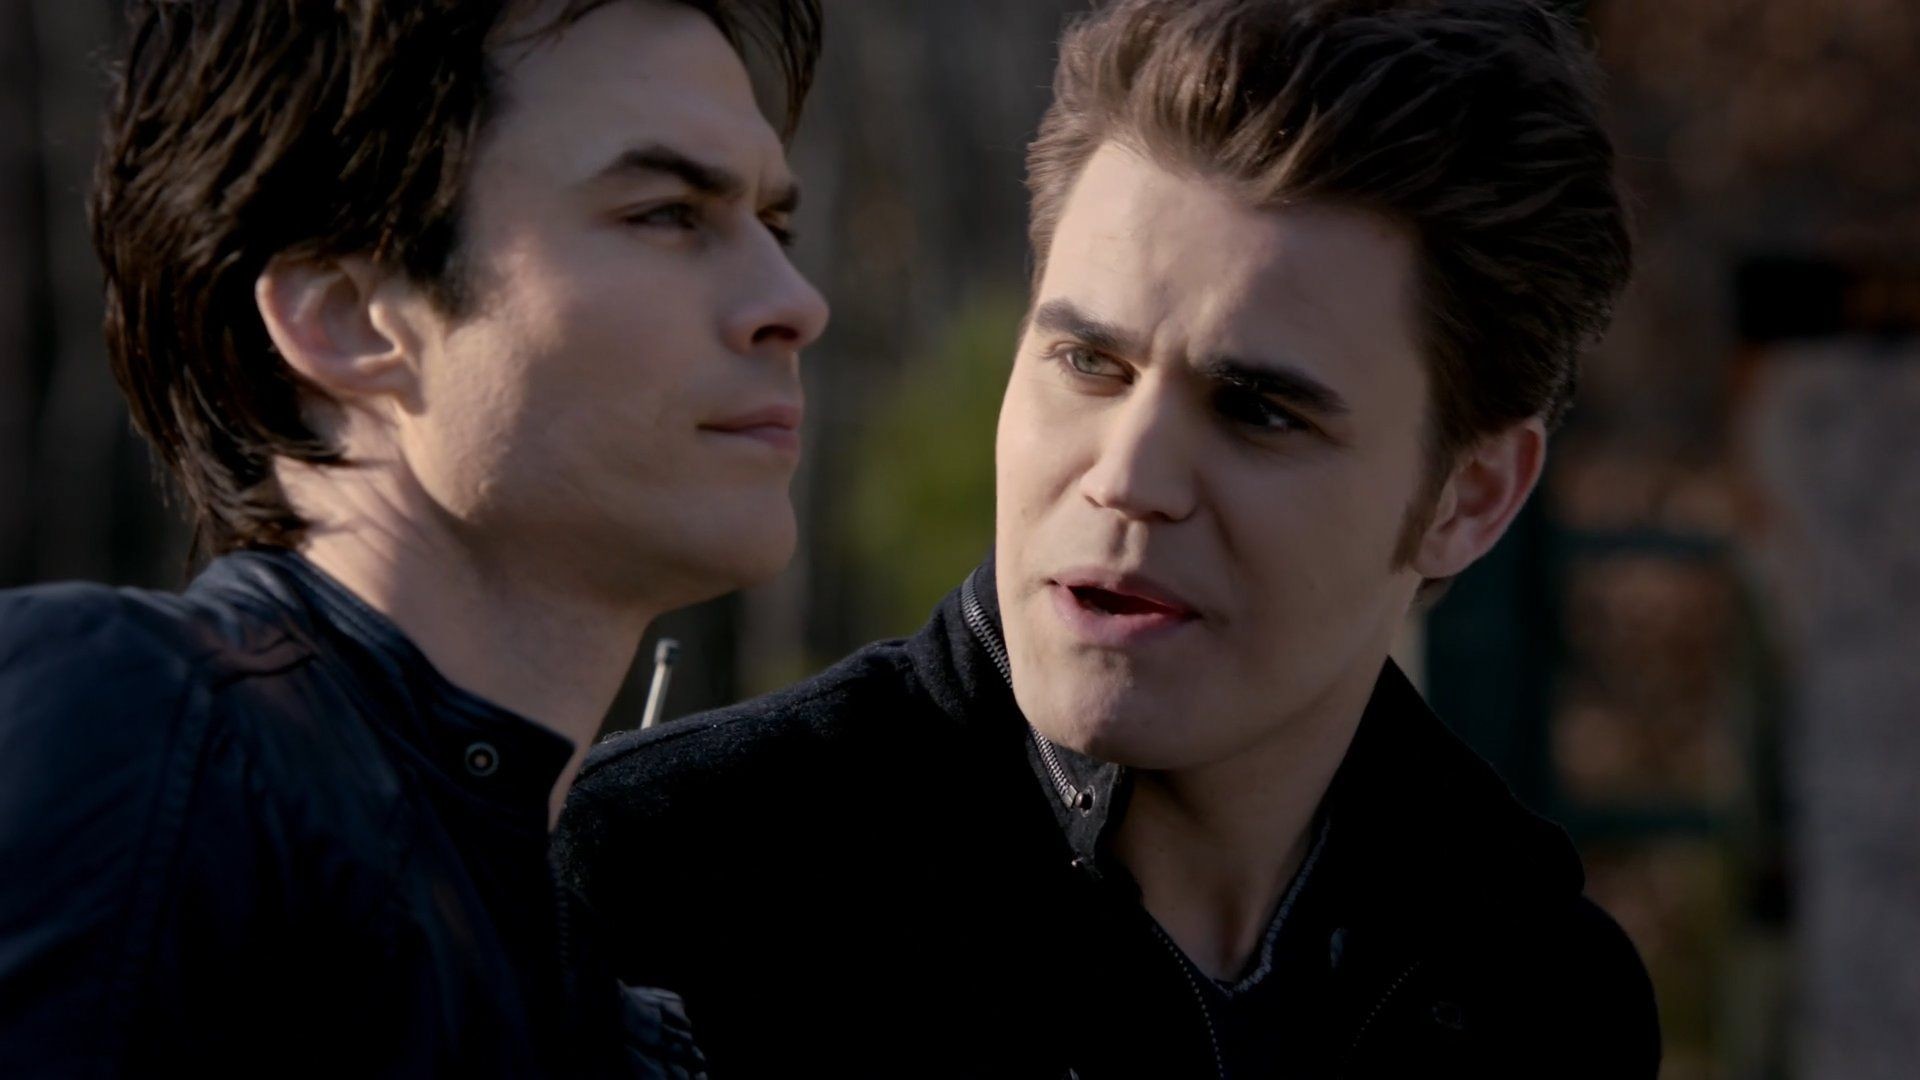 1920x1080 Love this Stefan and Damon pic!